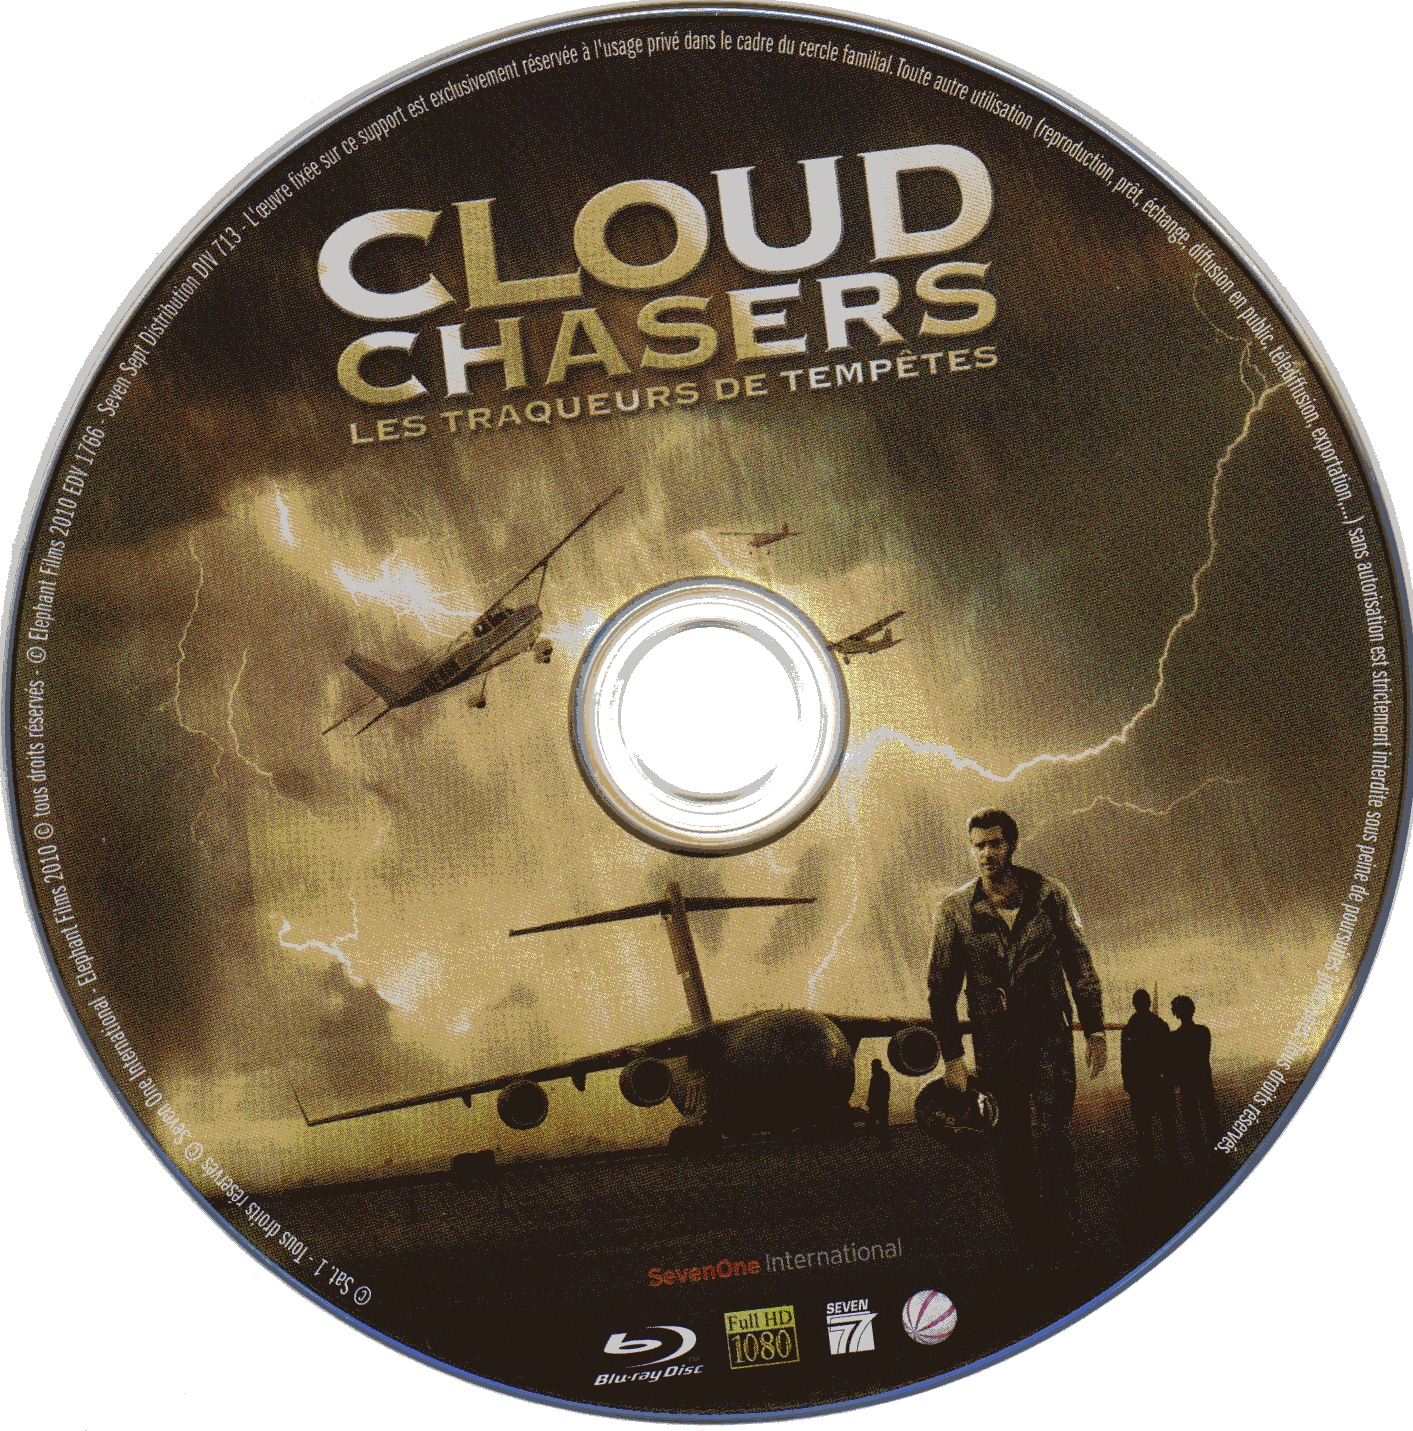 Cloud chasers